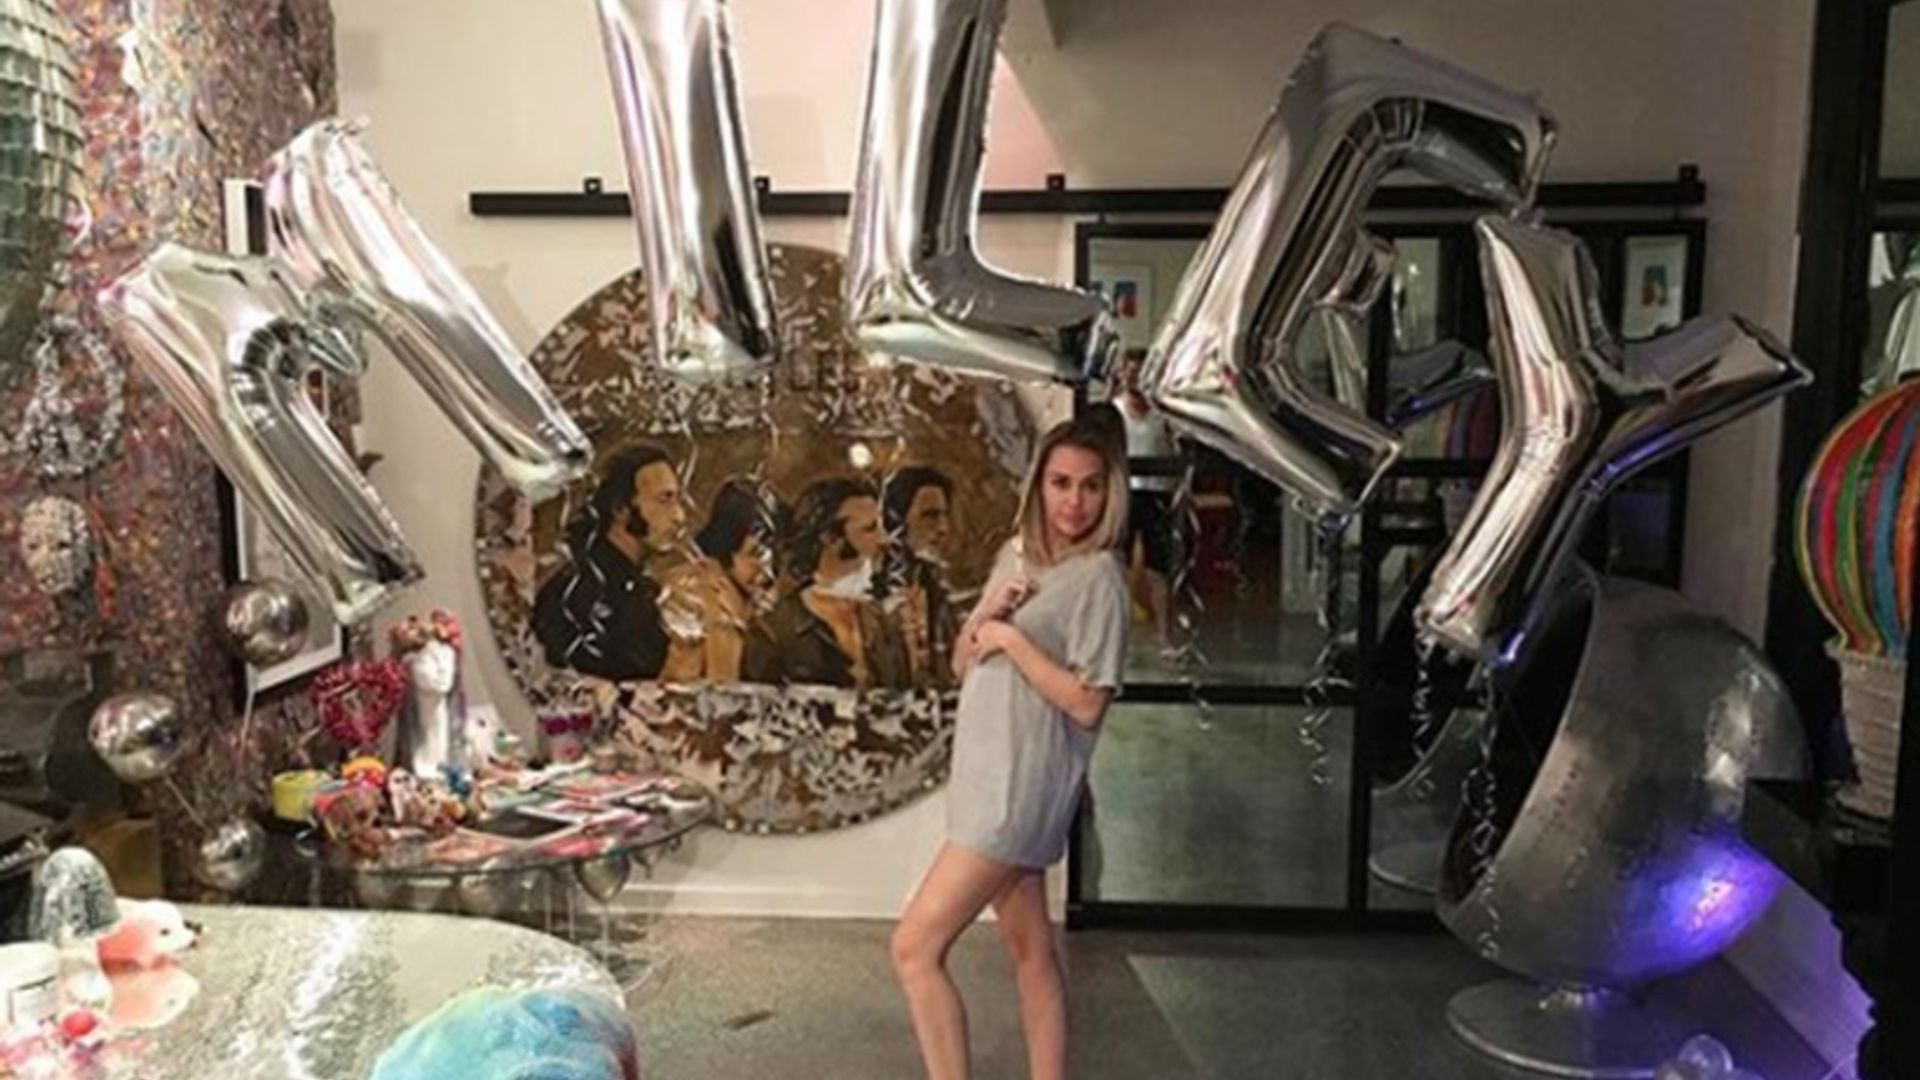 Miley Cyrus upset with fans after they said she looked pregnant